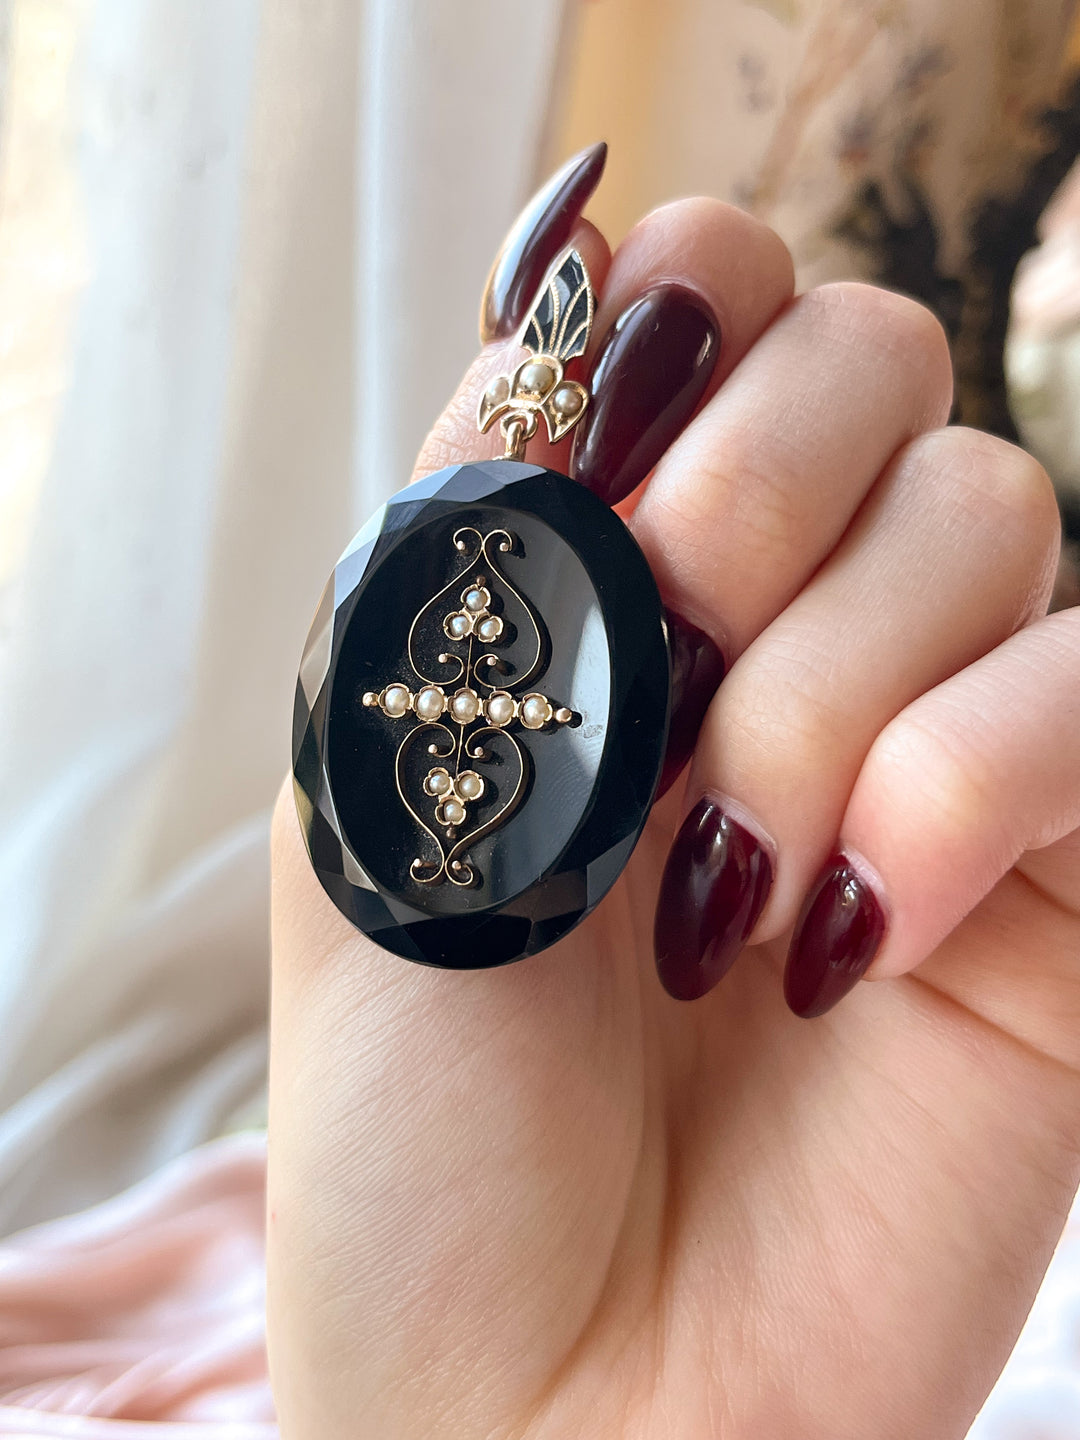 Onyx and Pearl Oval Cut Locket Pendant